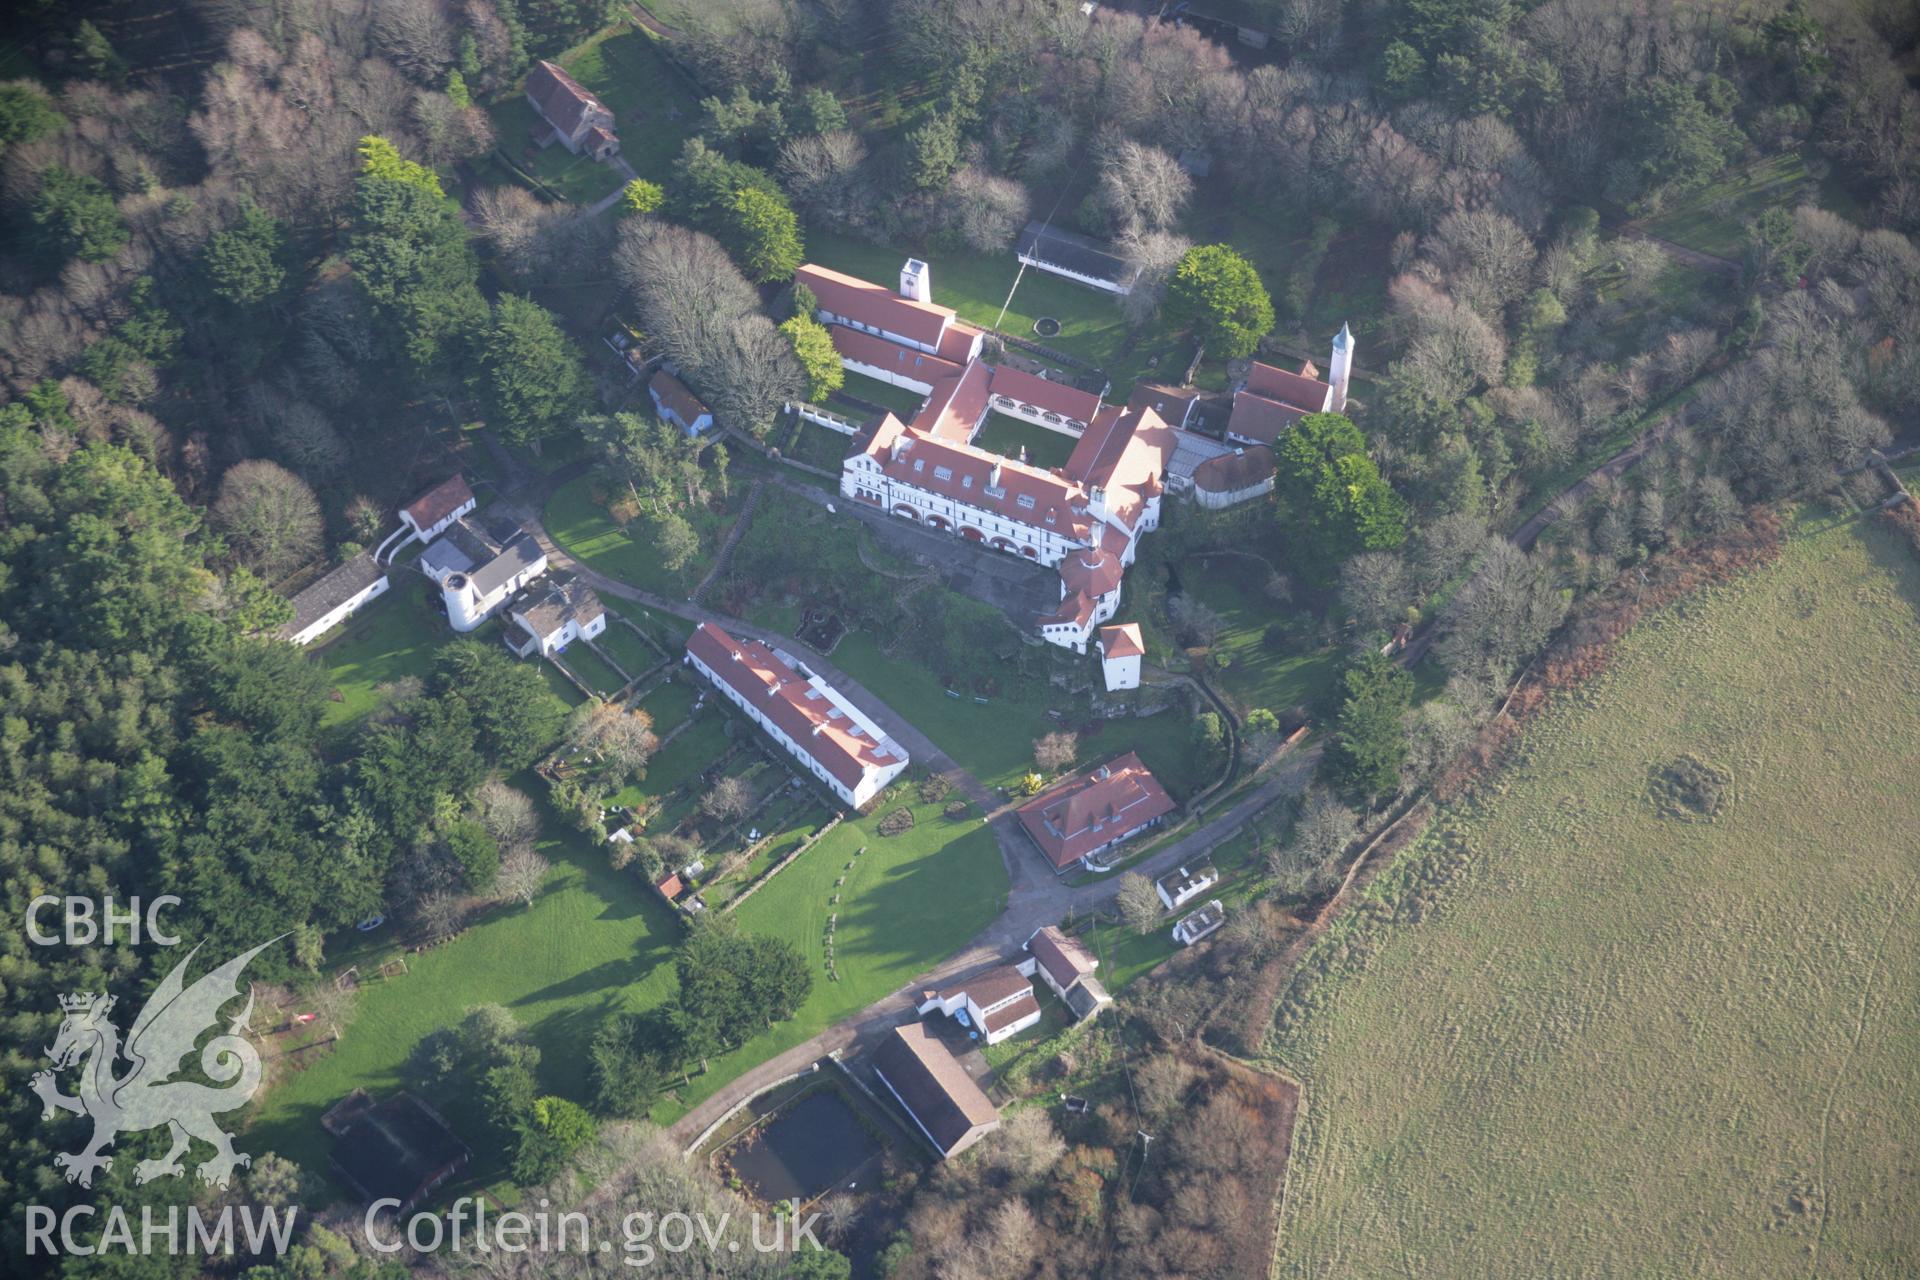 RCAHMW colour oblique aerial photograph of Caldey Monastery from the north-west. Taken on 11 January 2006 by Toby Driver.